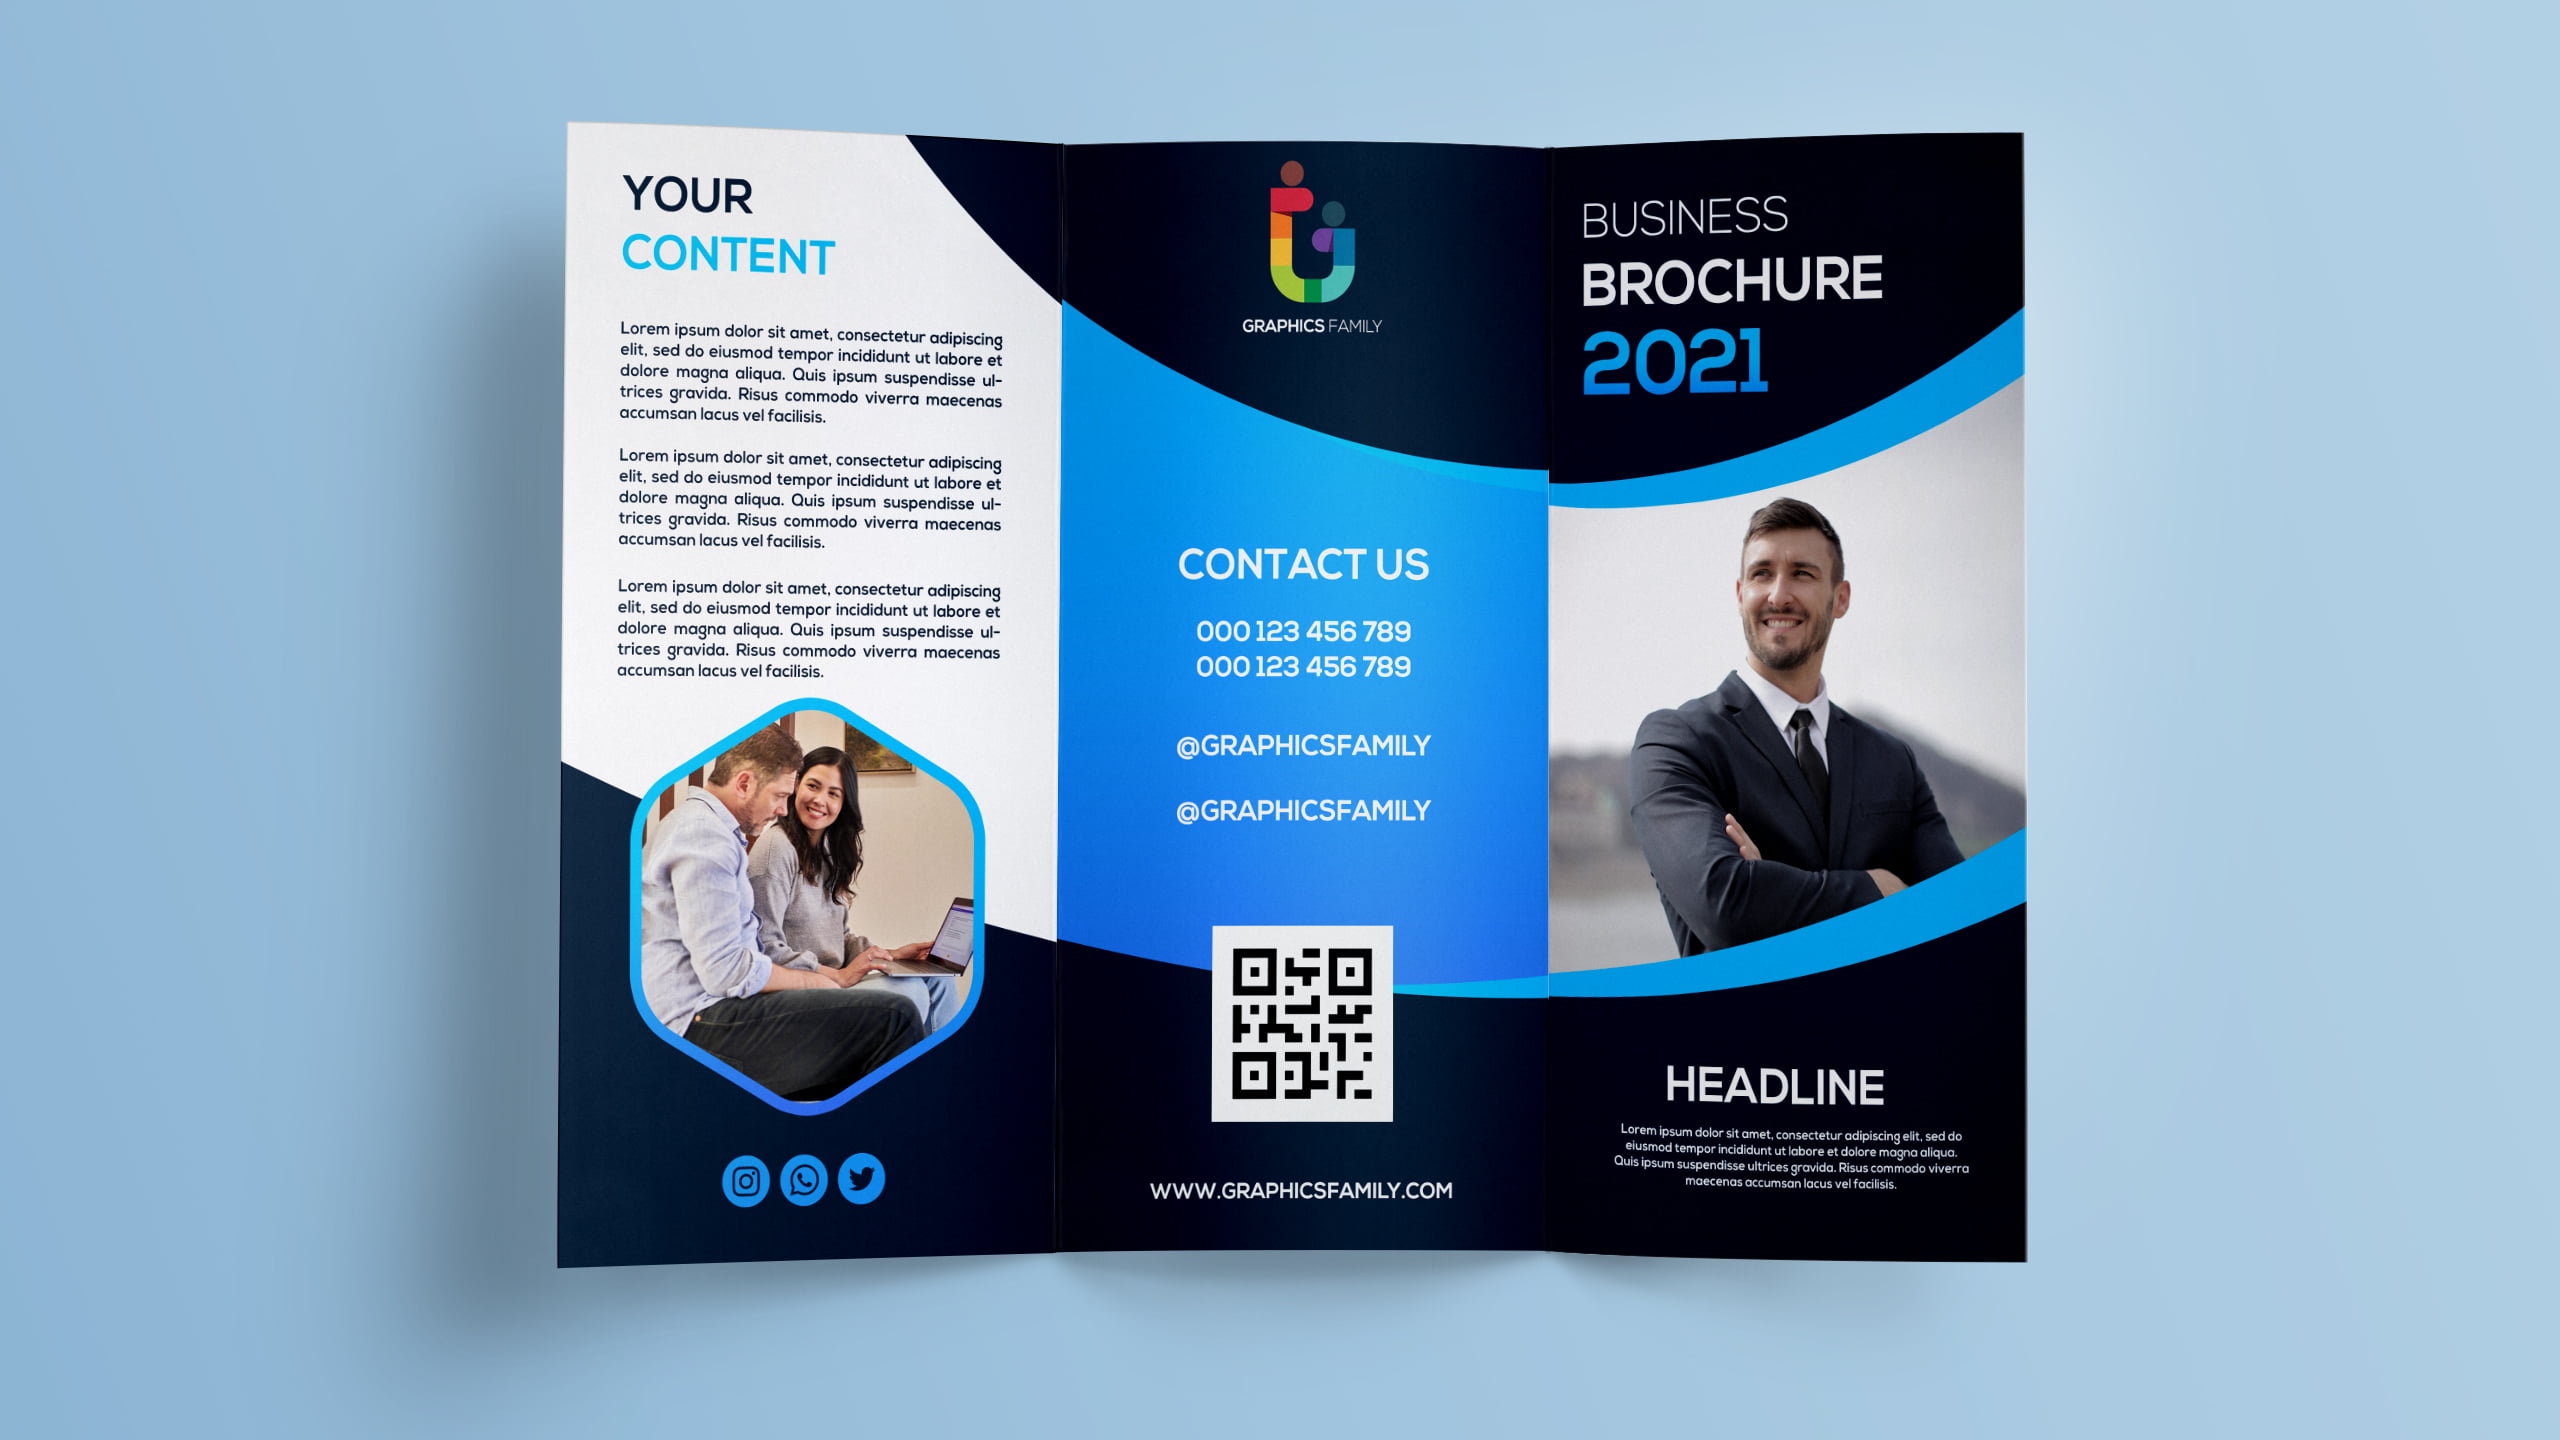 Free Photoshop Business Trifold Brochure Design Template – GraphicsFamily